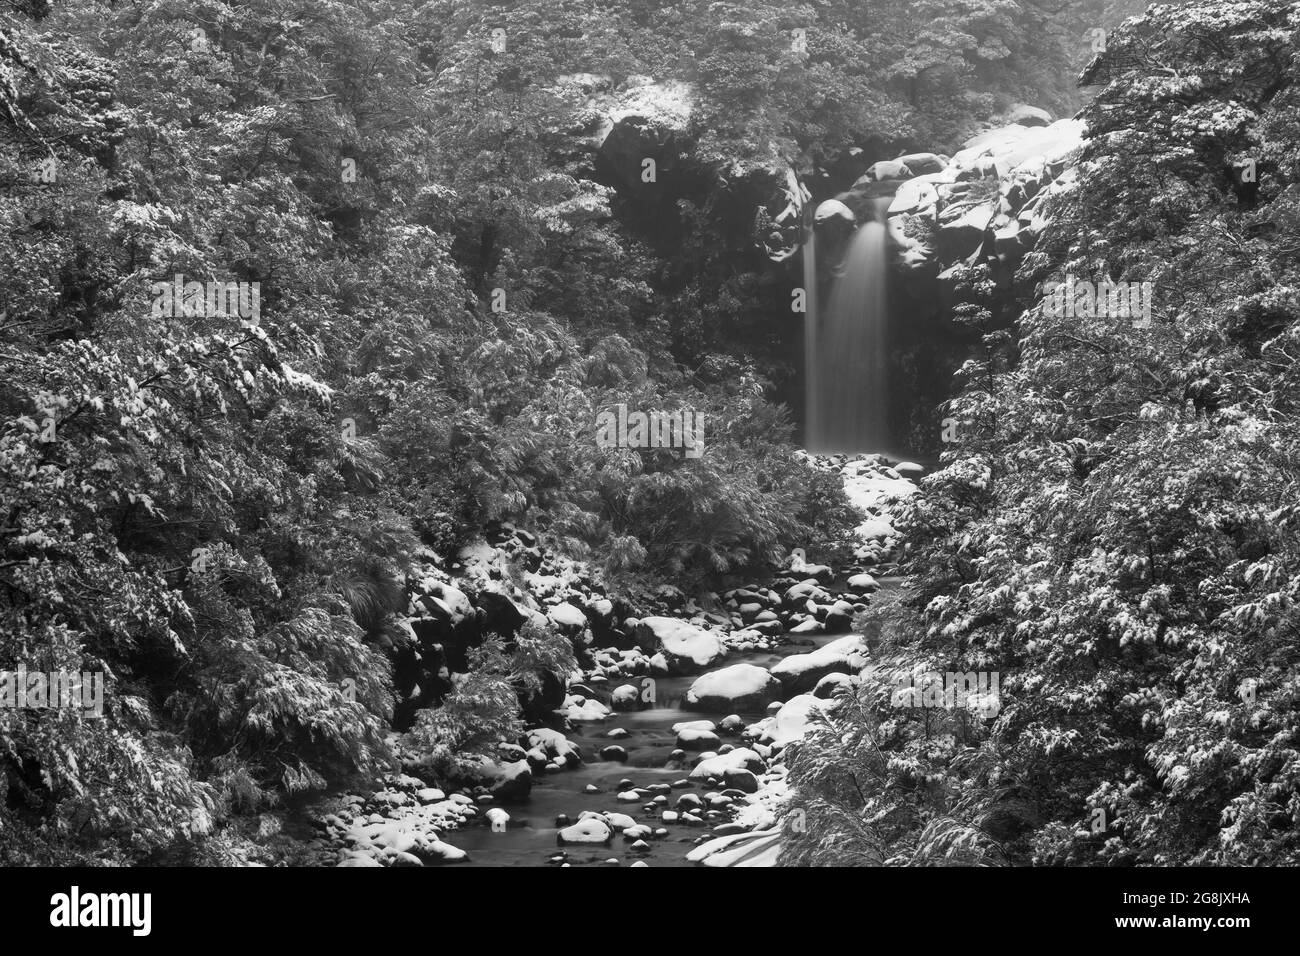 A waterfall and river in a snowy alpine forest. Black and white. Photographed on Mount Ruapehu, New Zealand Stock Photo